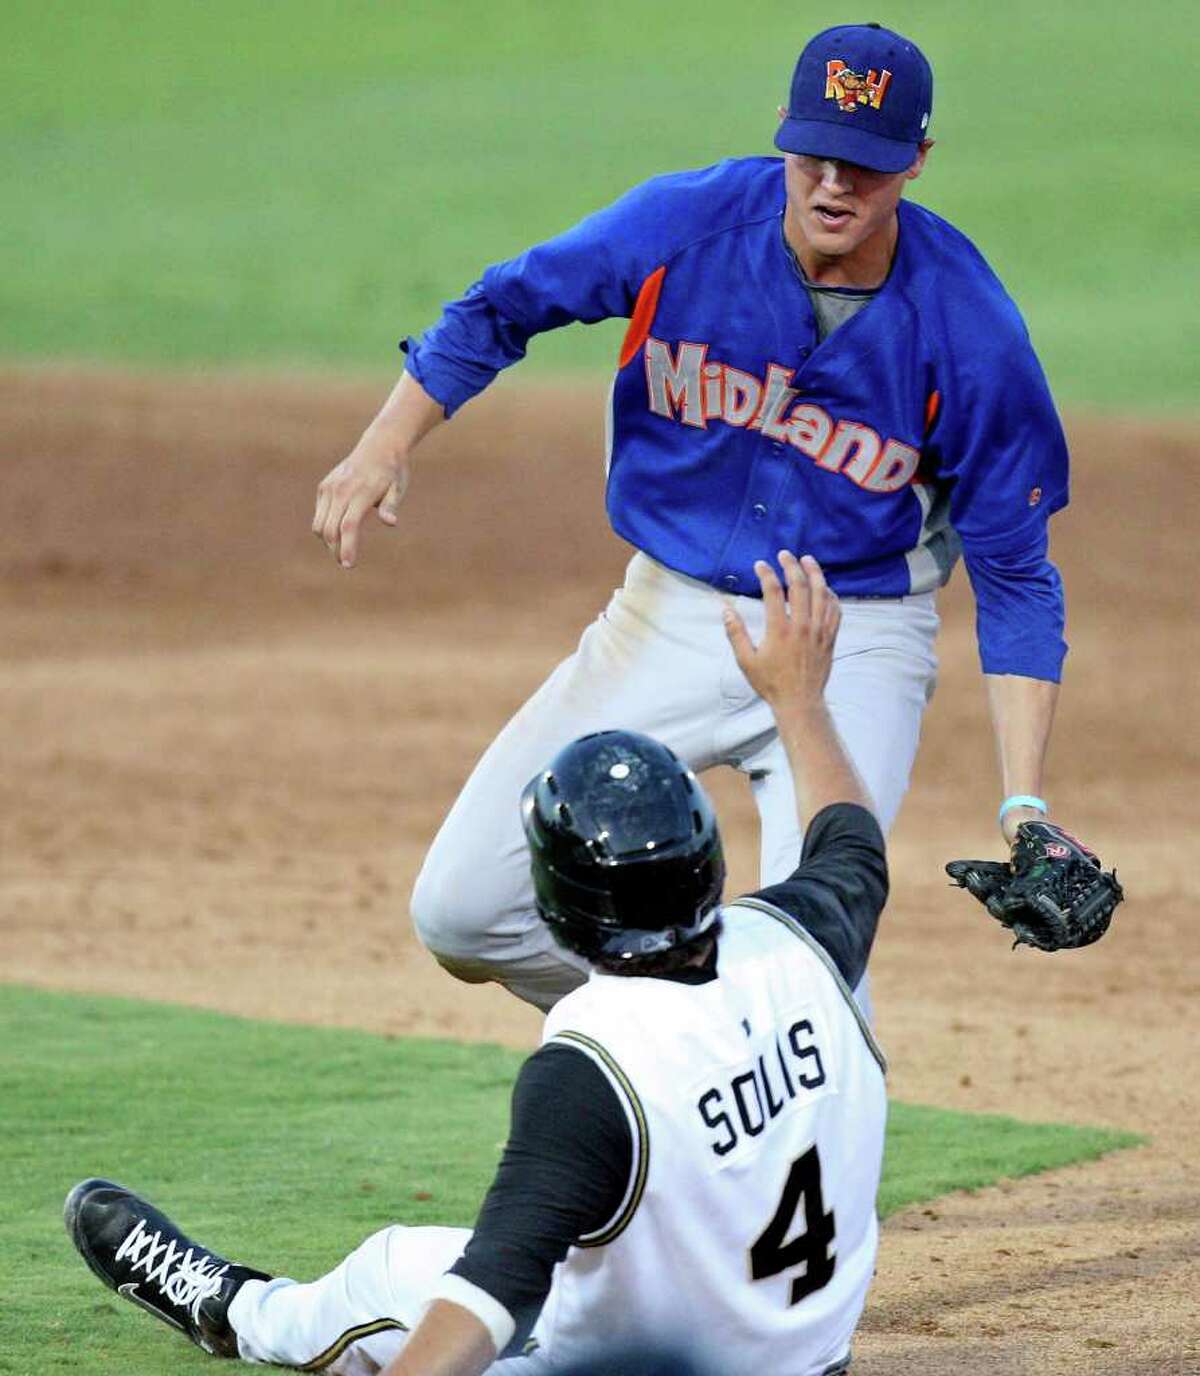 Missions' Ali Solis is tagged out by Rockhounds' Grant Green after slipping during a rundown in the fifth inning.